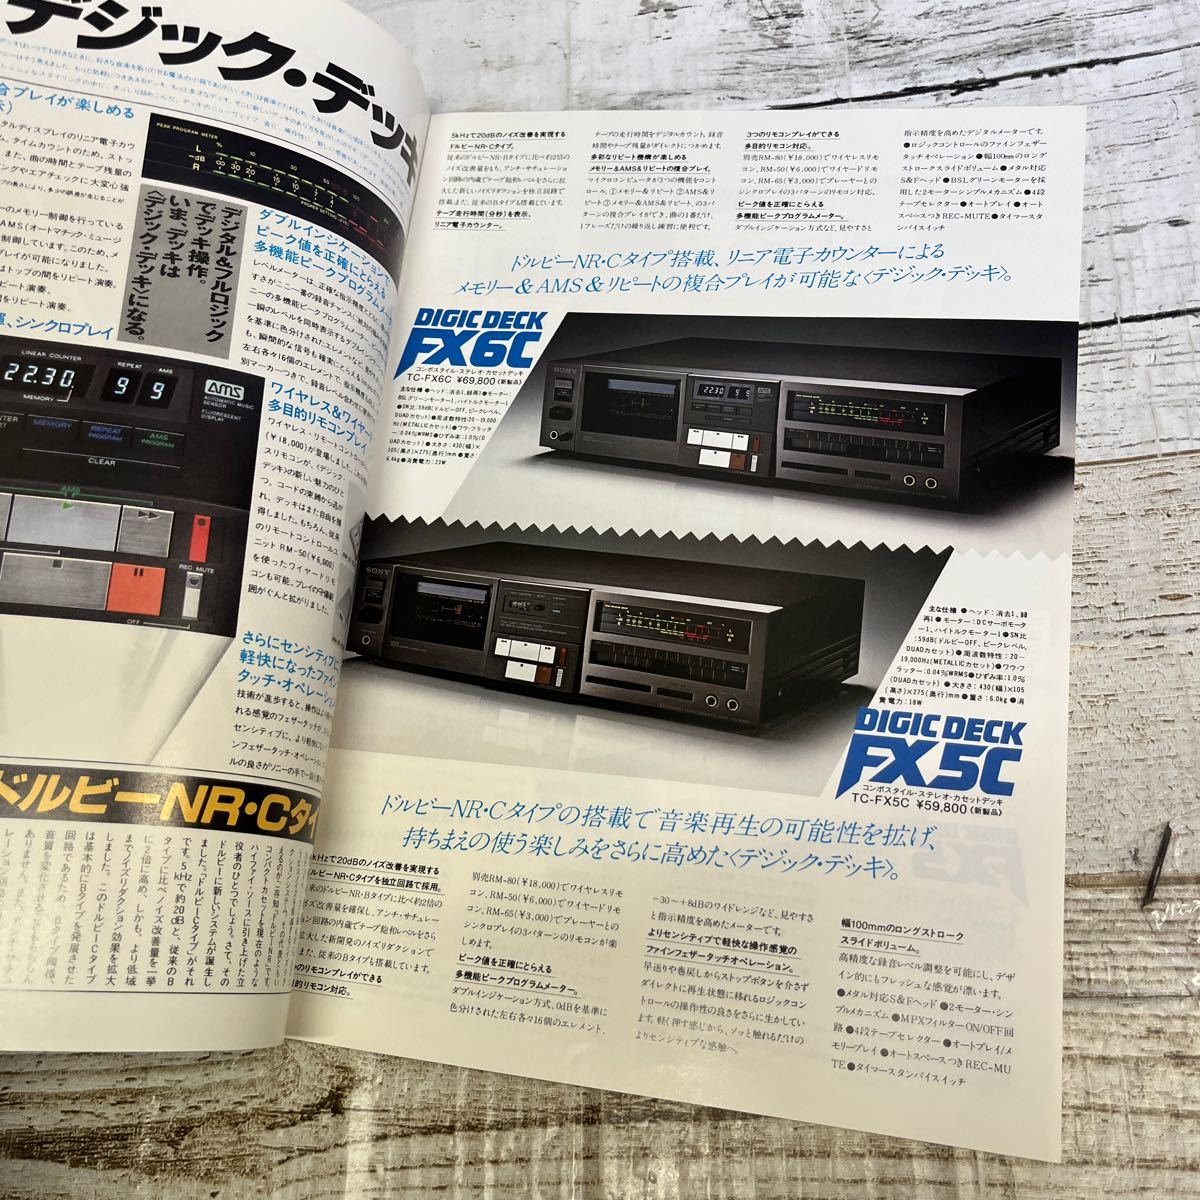 P359 [SONY( Sony ) cassette deck general catalogue Showa era 56 year 1 month ]TC-FX6/TC-FX7/TC-K777/TC-K75/TC-K71/TC-K65/TC-K61/TC-K22/ another 